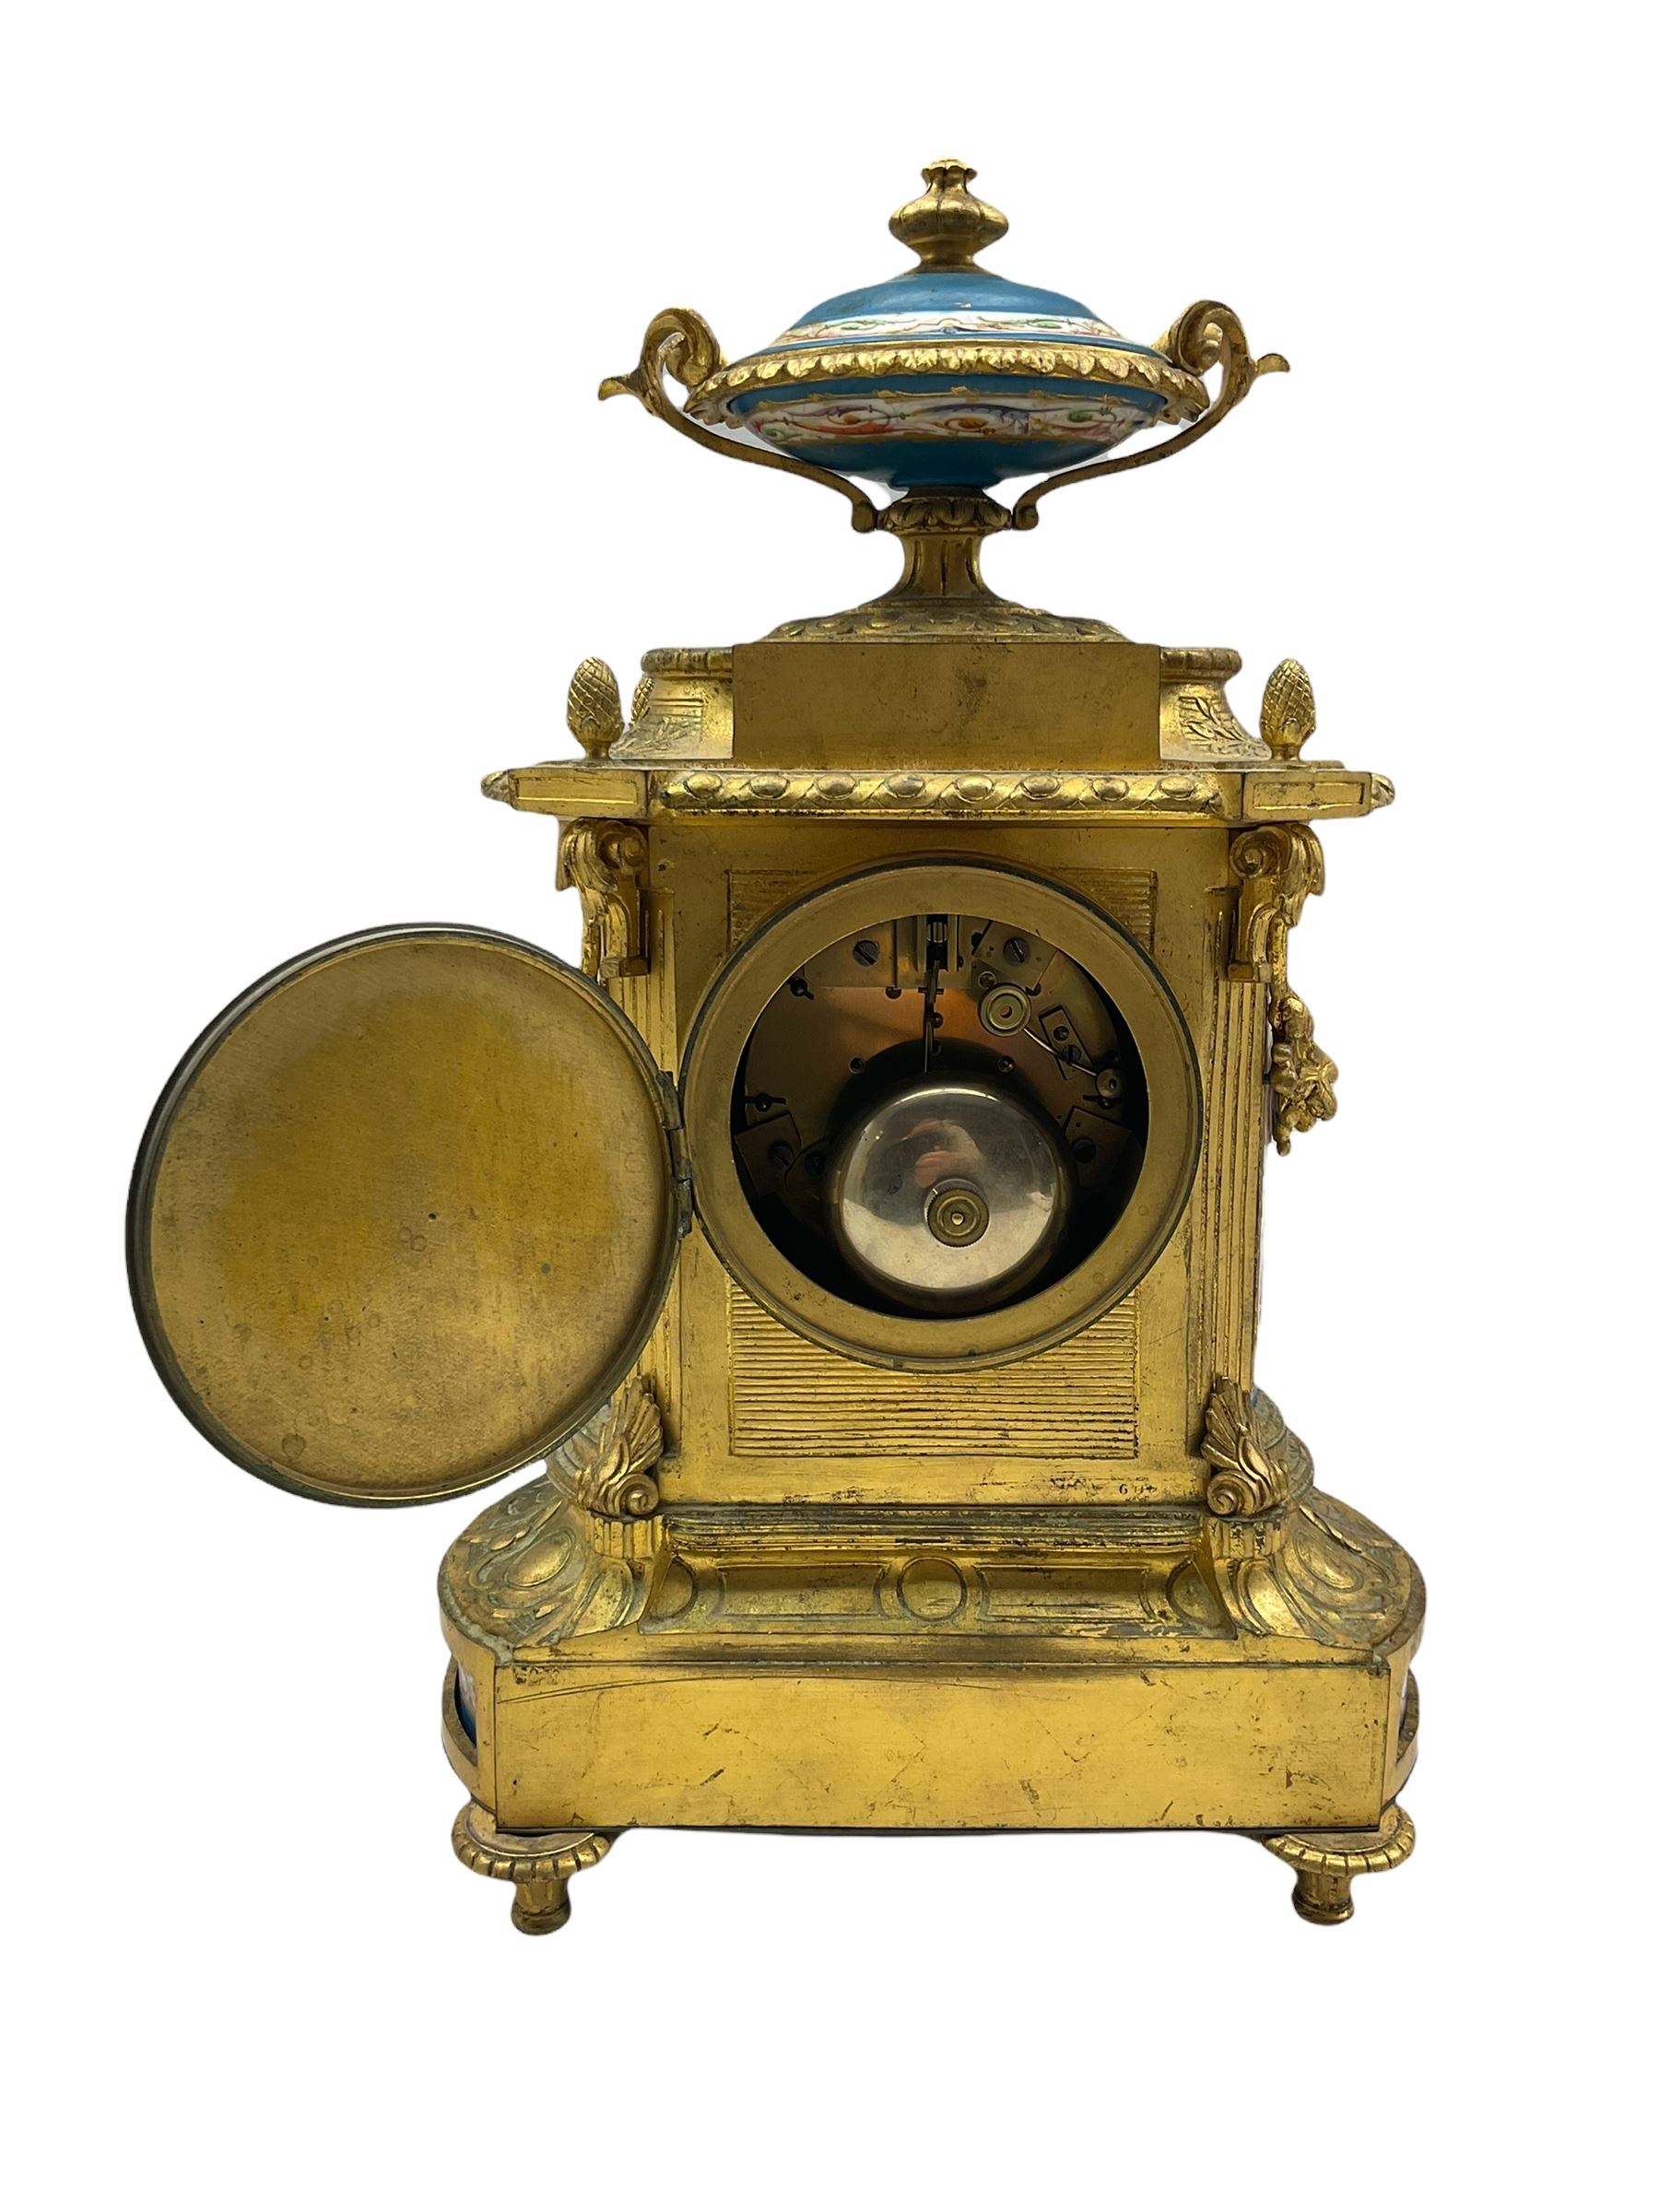 Gilt and porcelain mounted mantle clock - Image 5 of 6